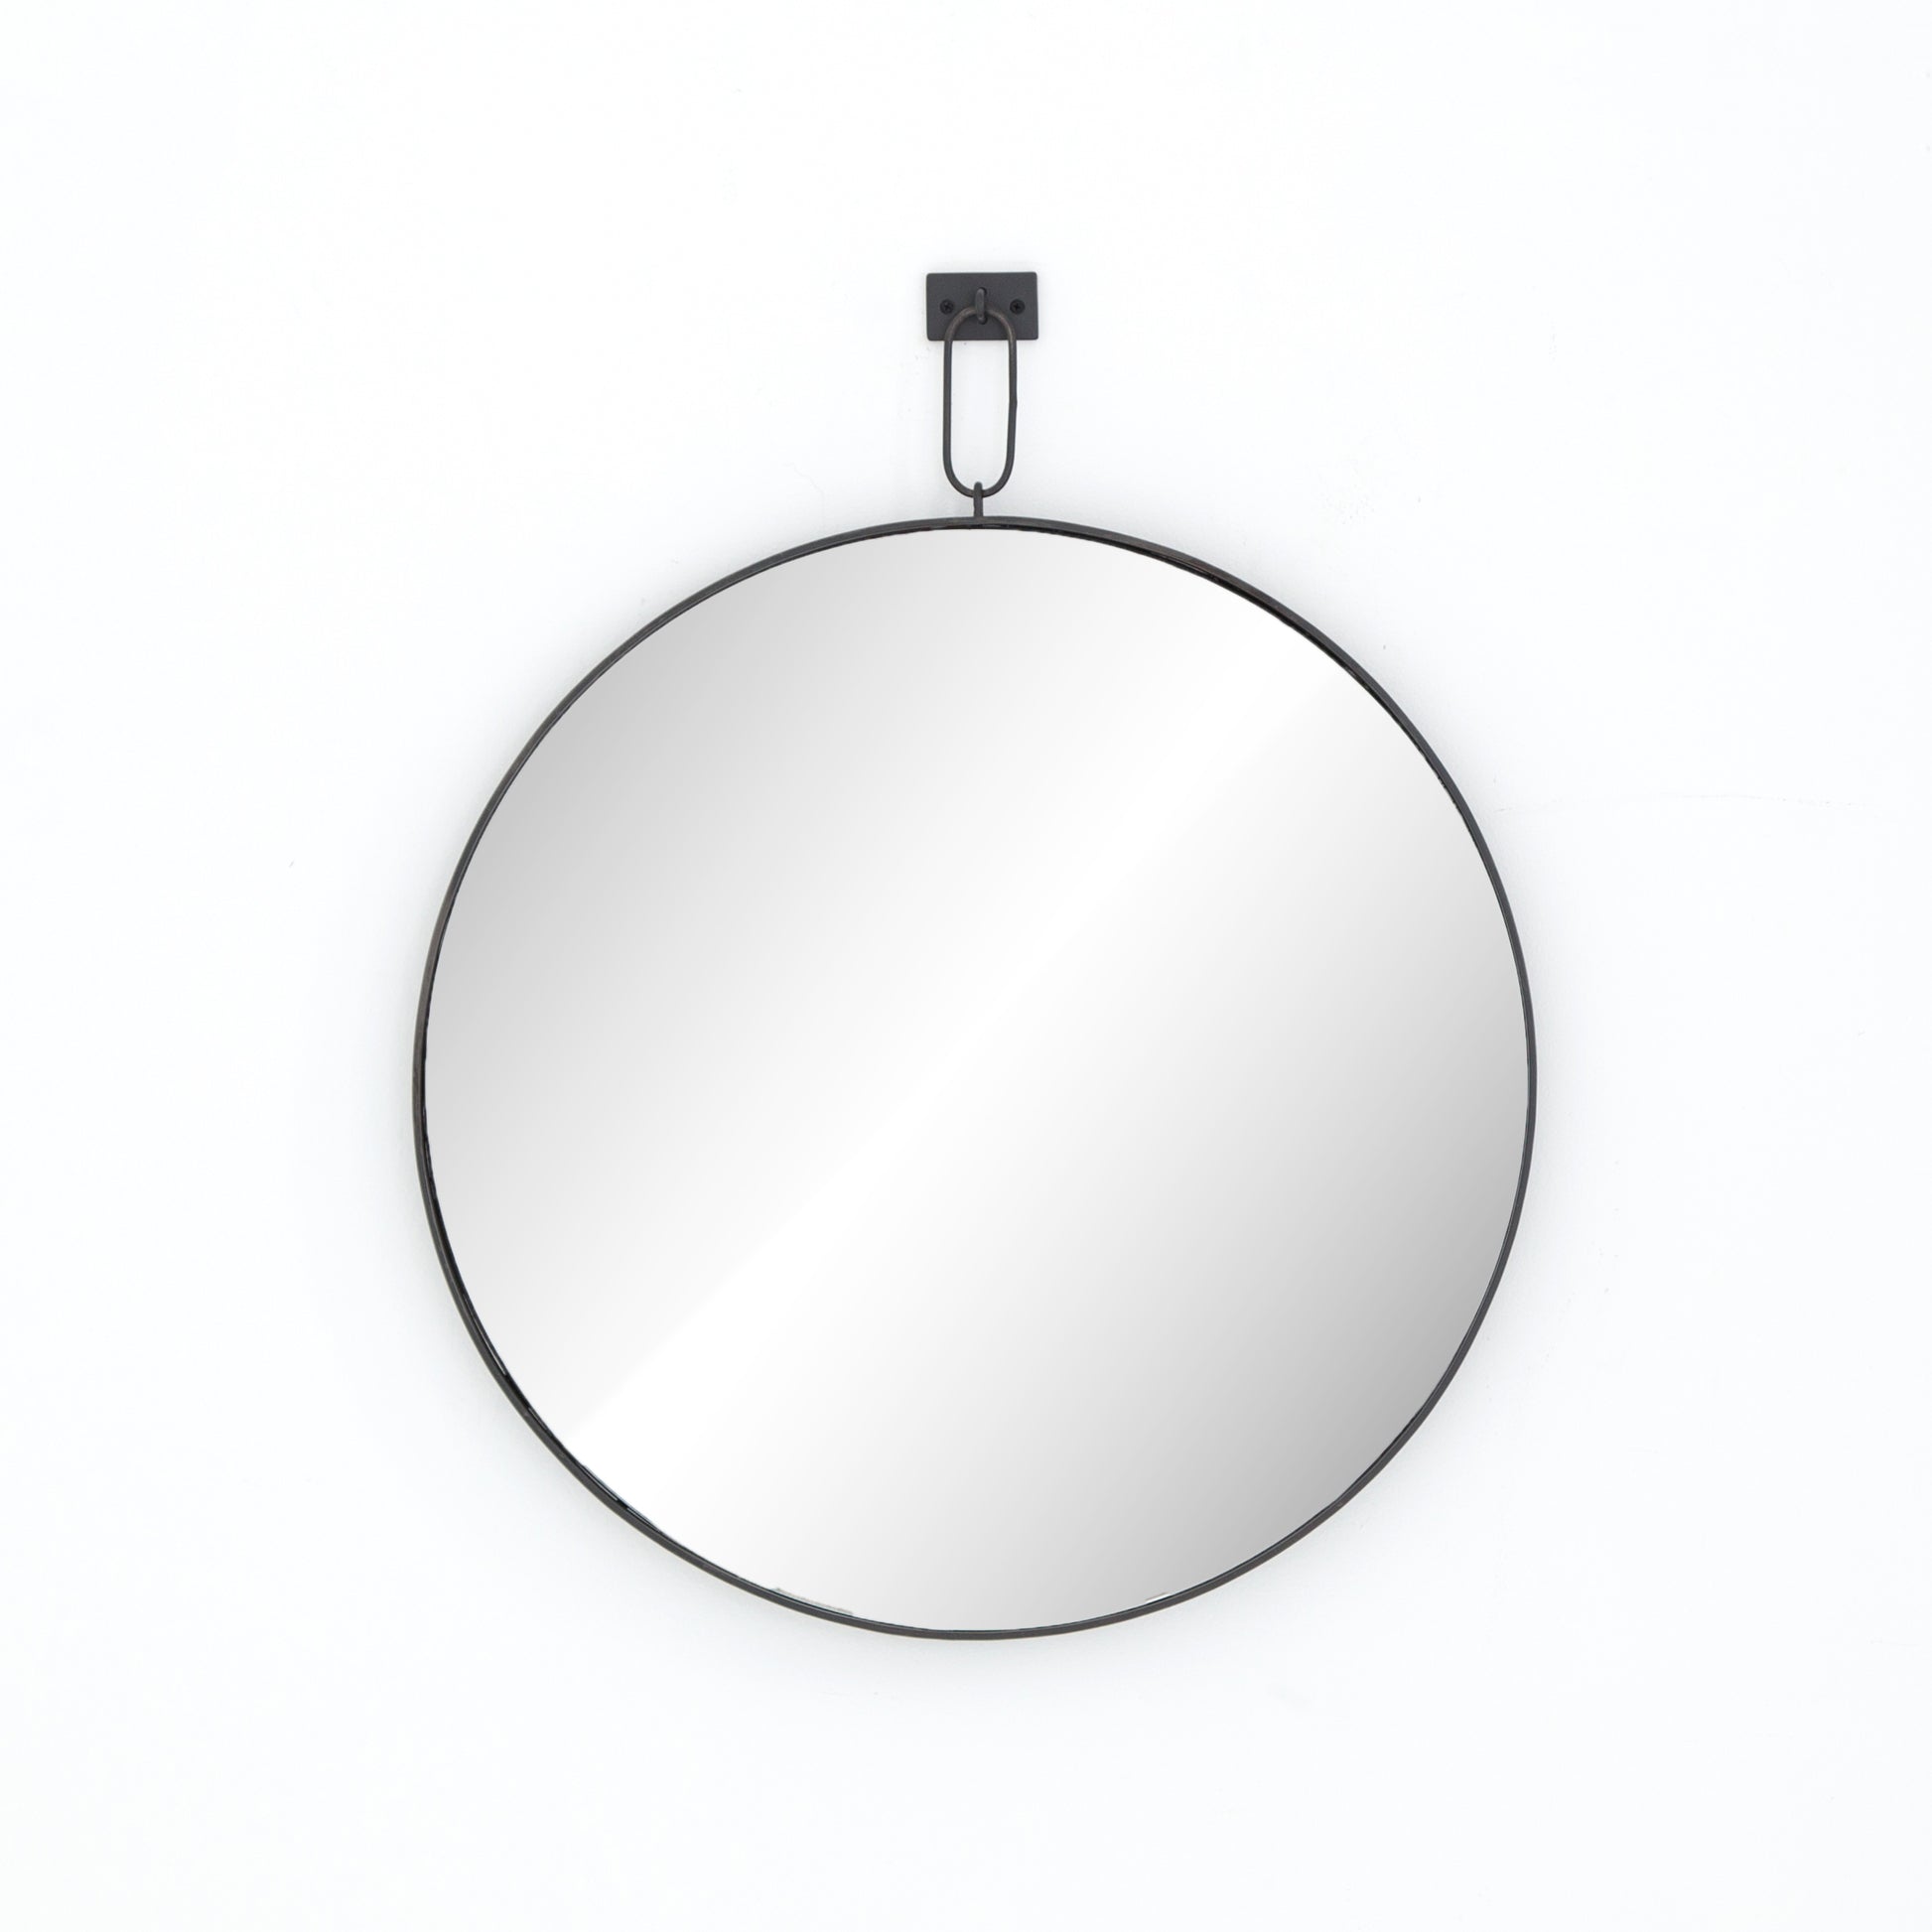 The Mercy Mirror - A stunning The Mercy Mirror from Grace Blu Shoppe, adding elegance and depth to your wall decor.